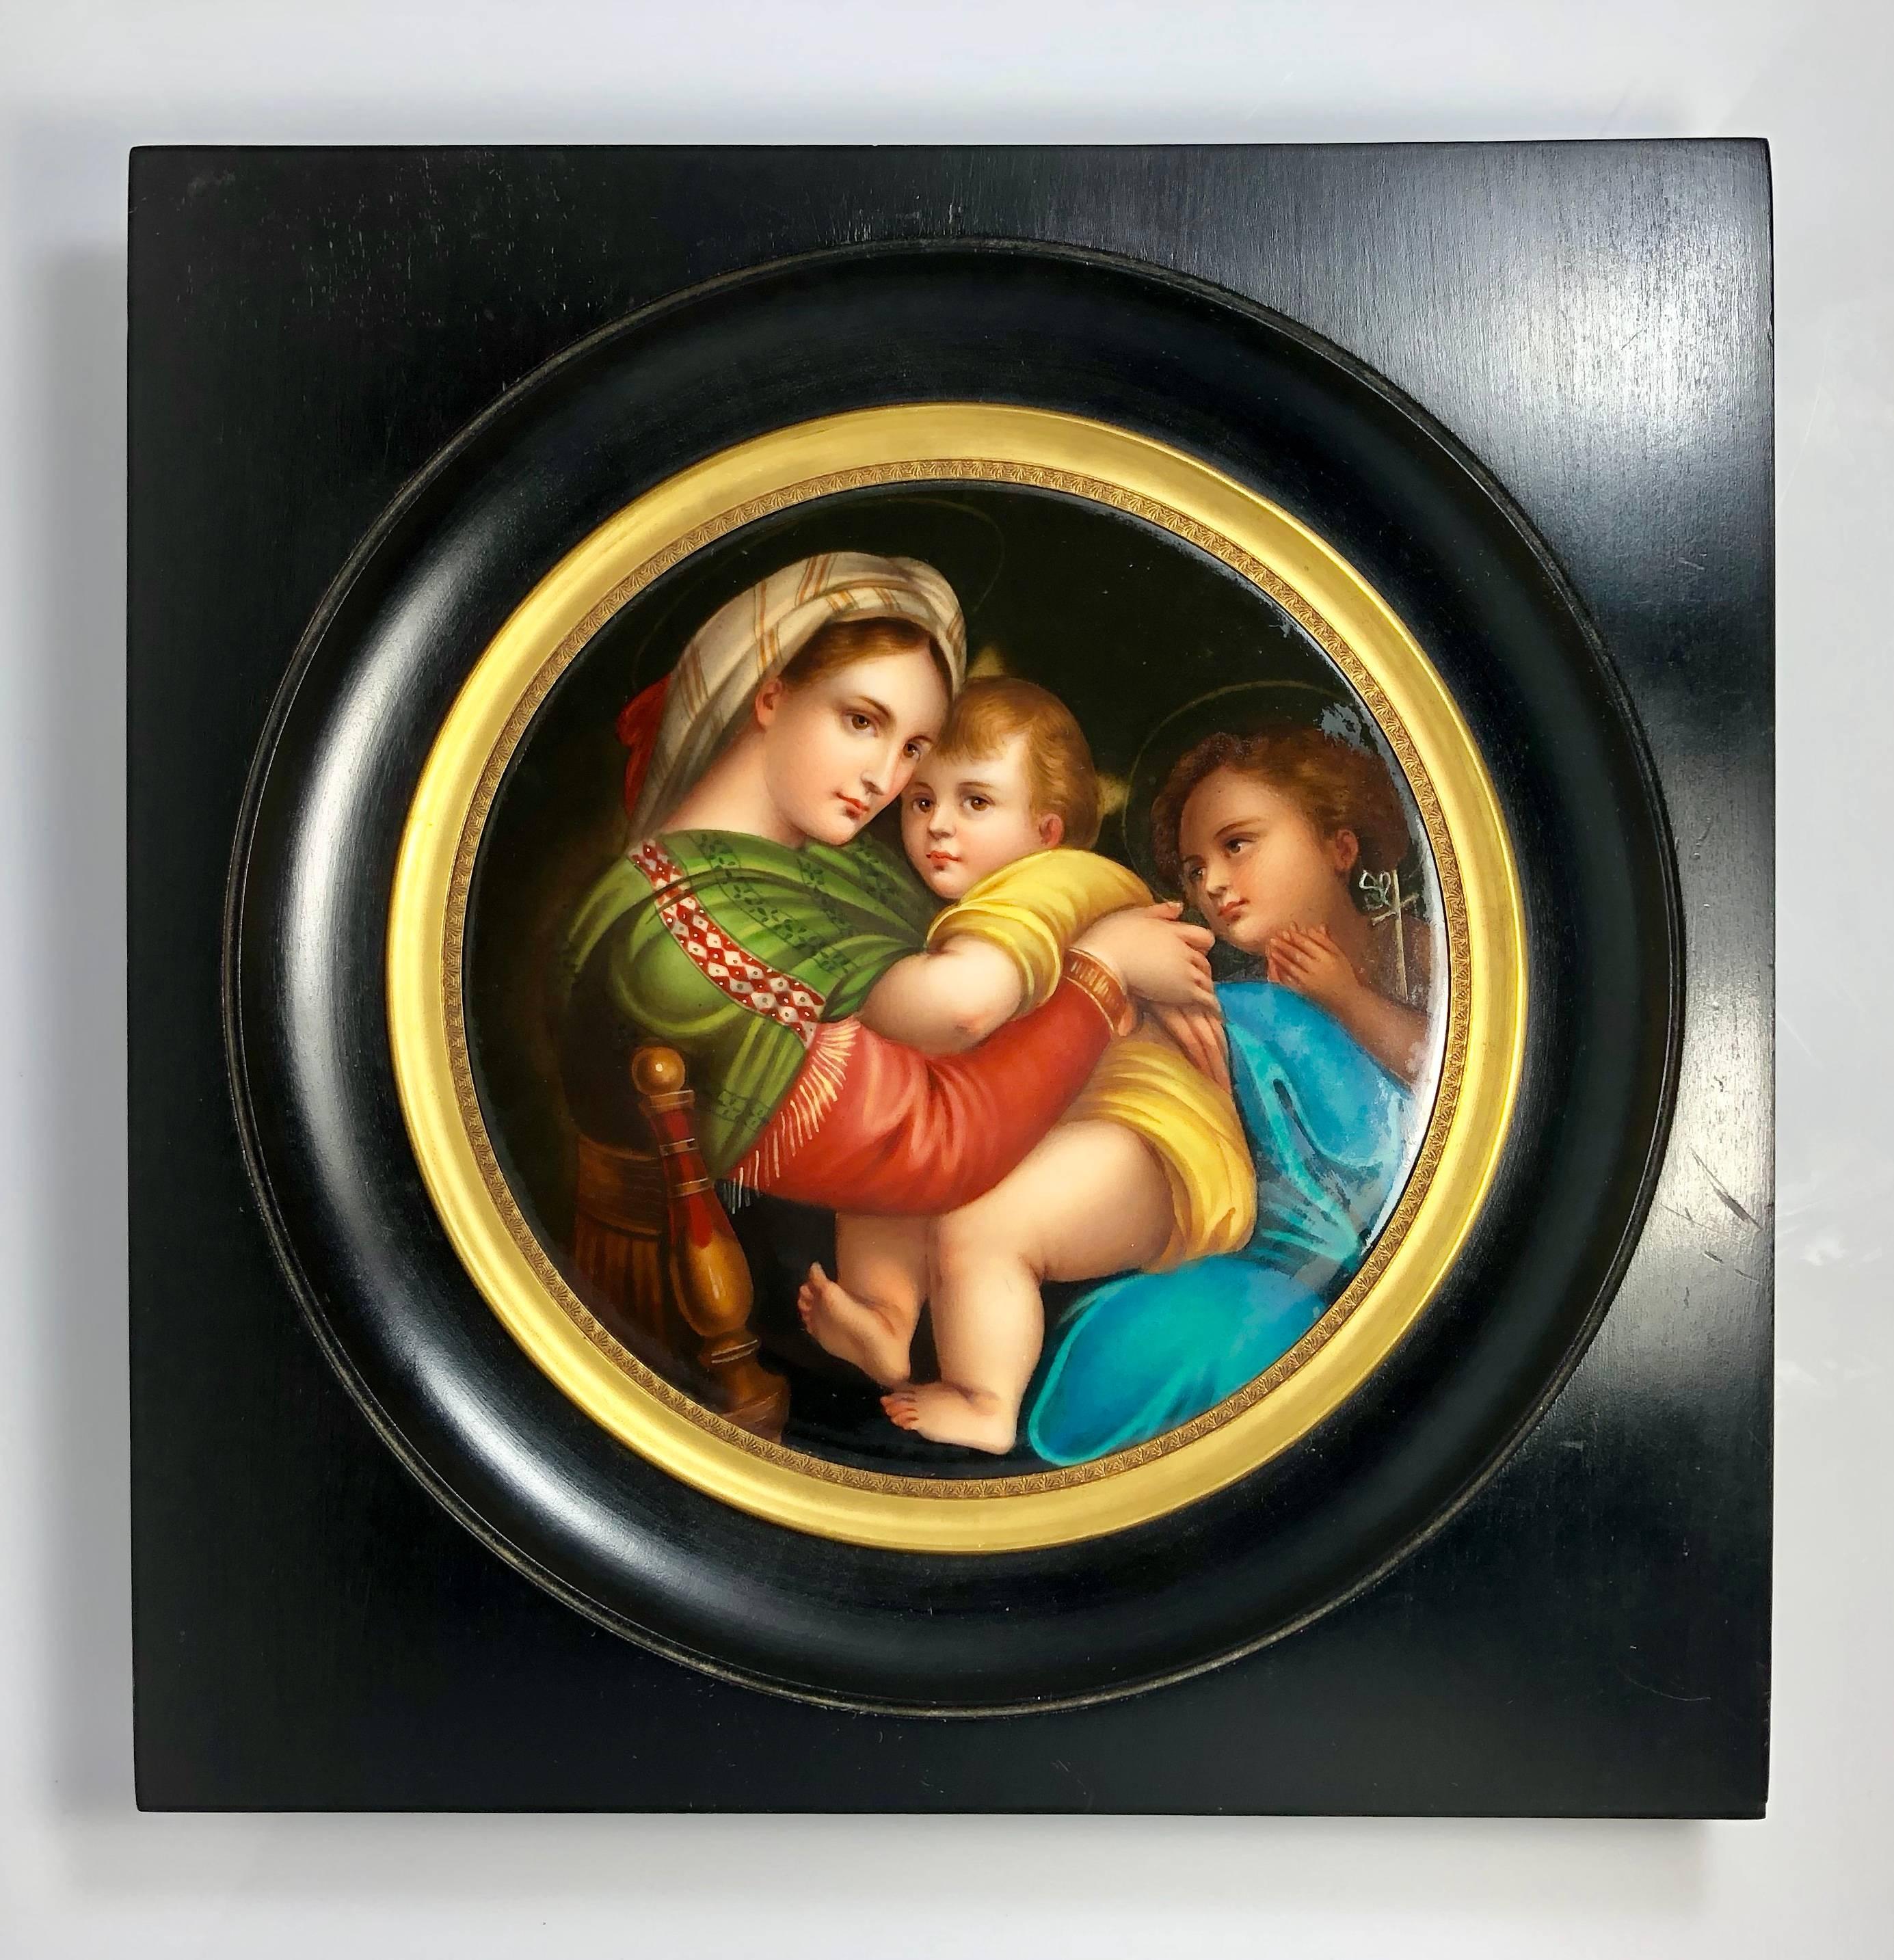 Antique Italian hand-painted porcelain of Madonna and child, circa 1900.